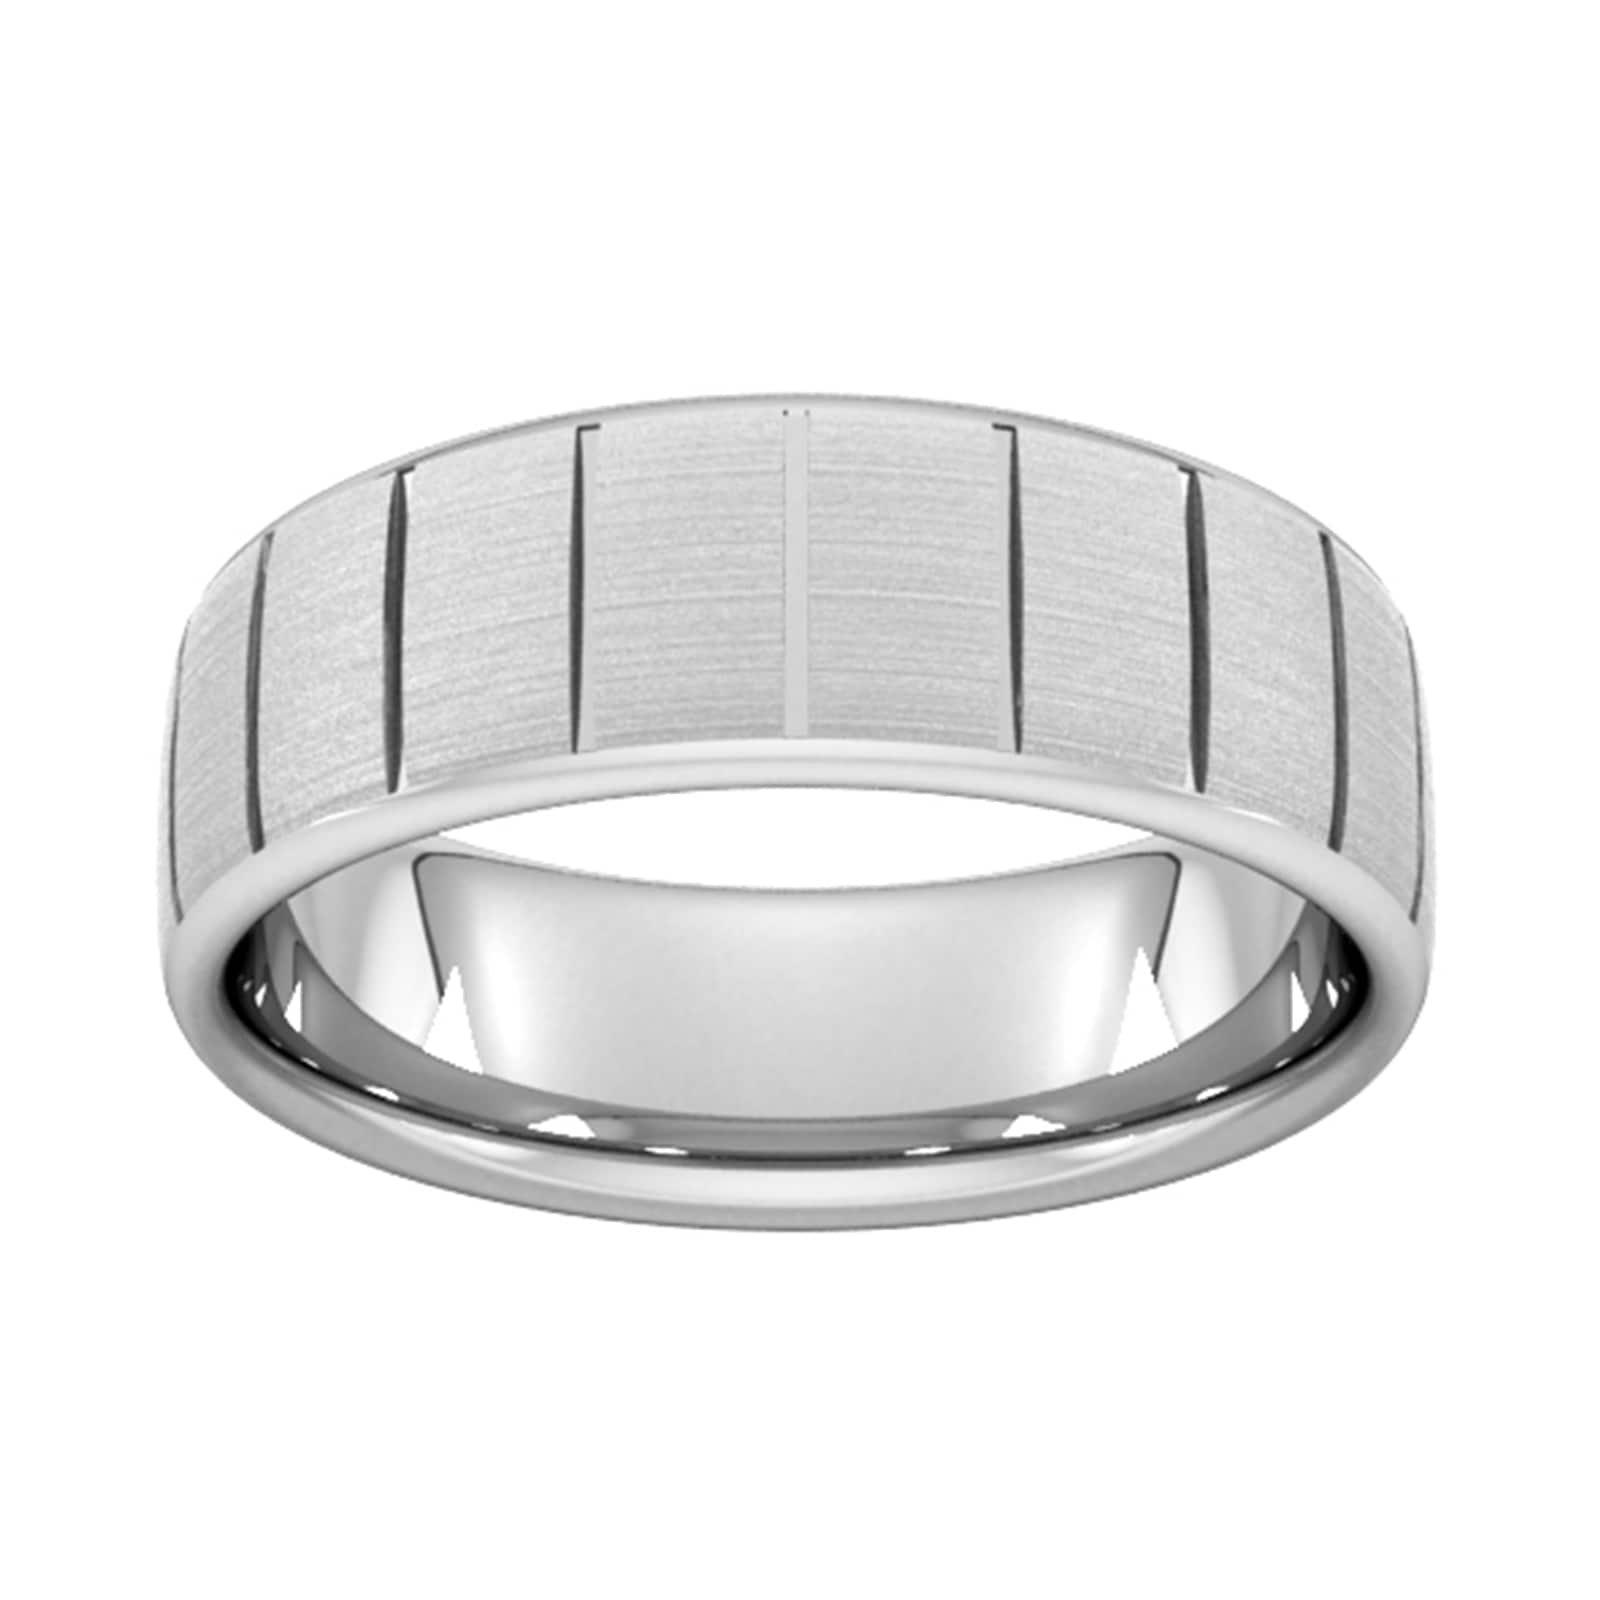 8mm D Shape Heavy Vertical Lines Wedding Ring In 9 Carat White Gold - Ring Size S